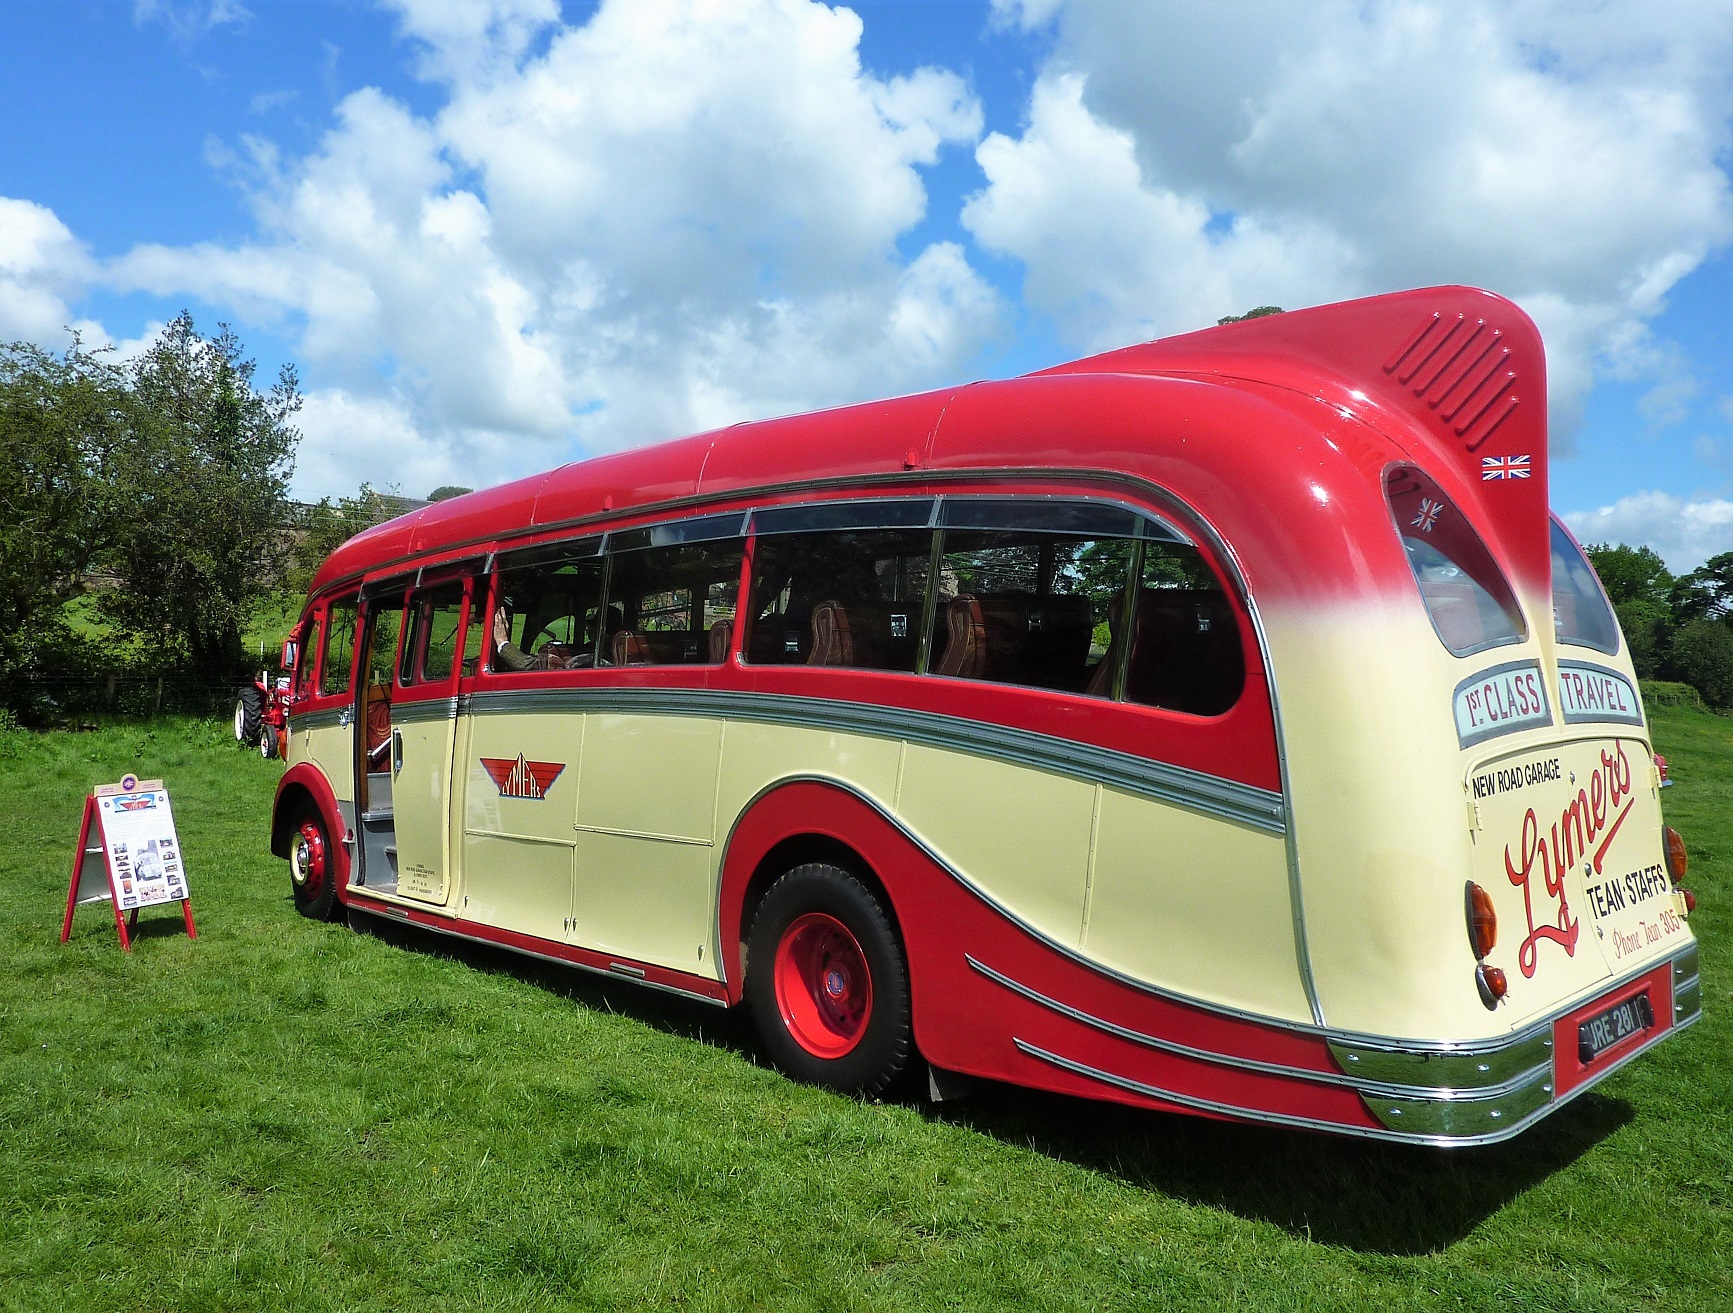 Harrington coaches to gather at Wythall on 21 May